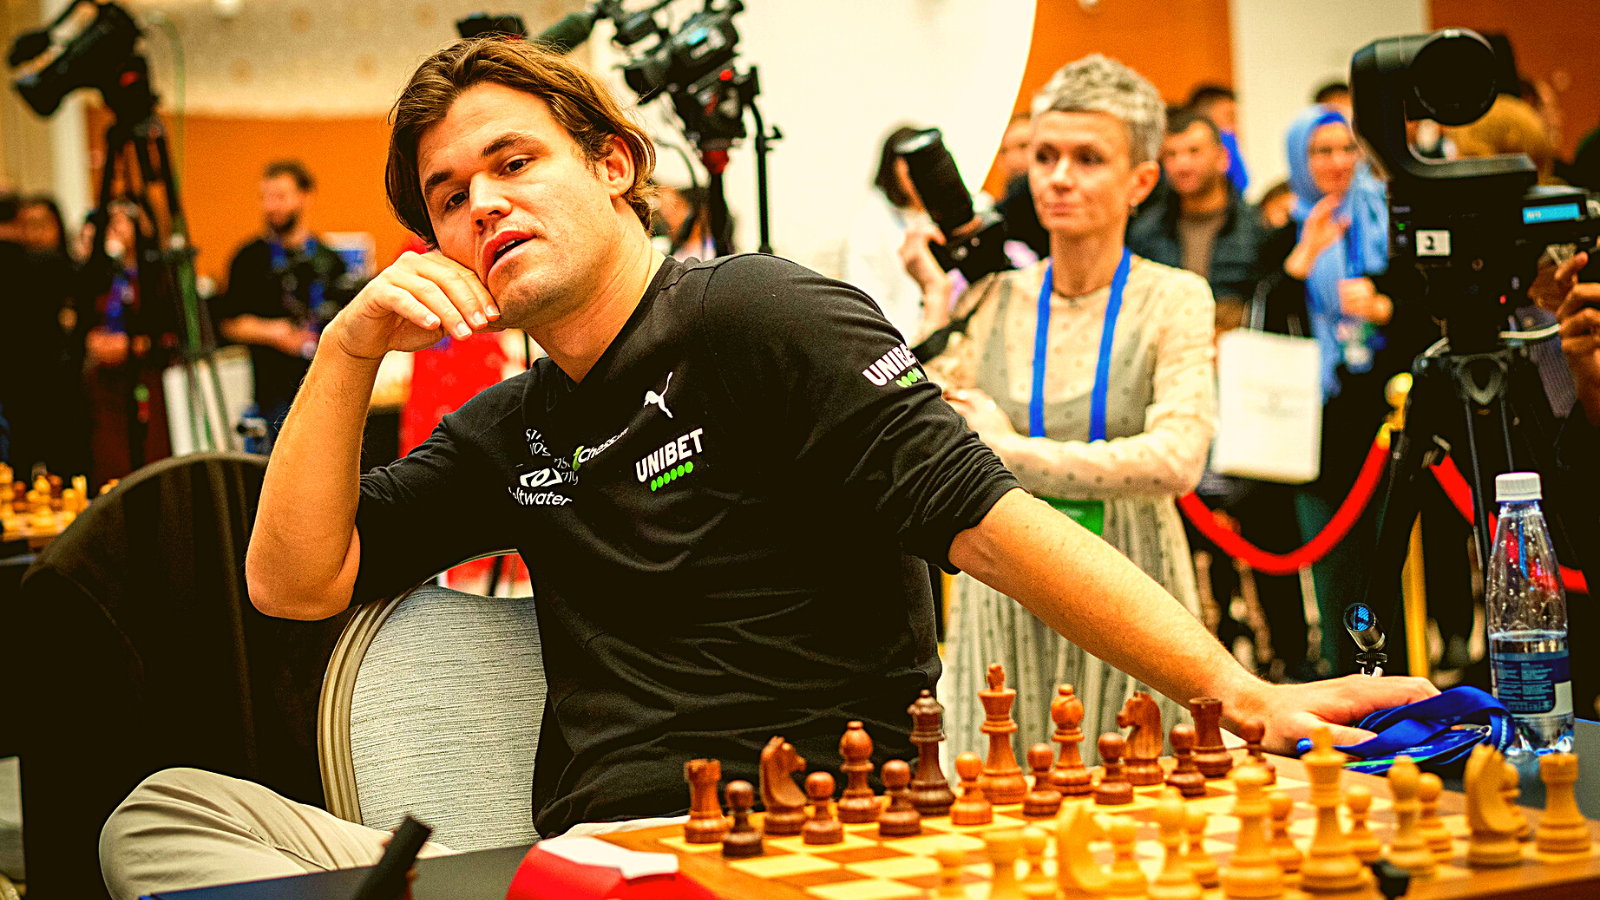 android, candidates 2024: magnus carlsen formally declines invite to compete, nijat abasov to join gukesh, pragg and vidit